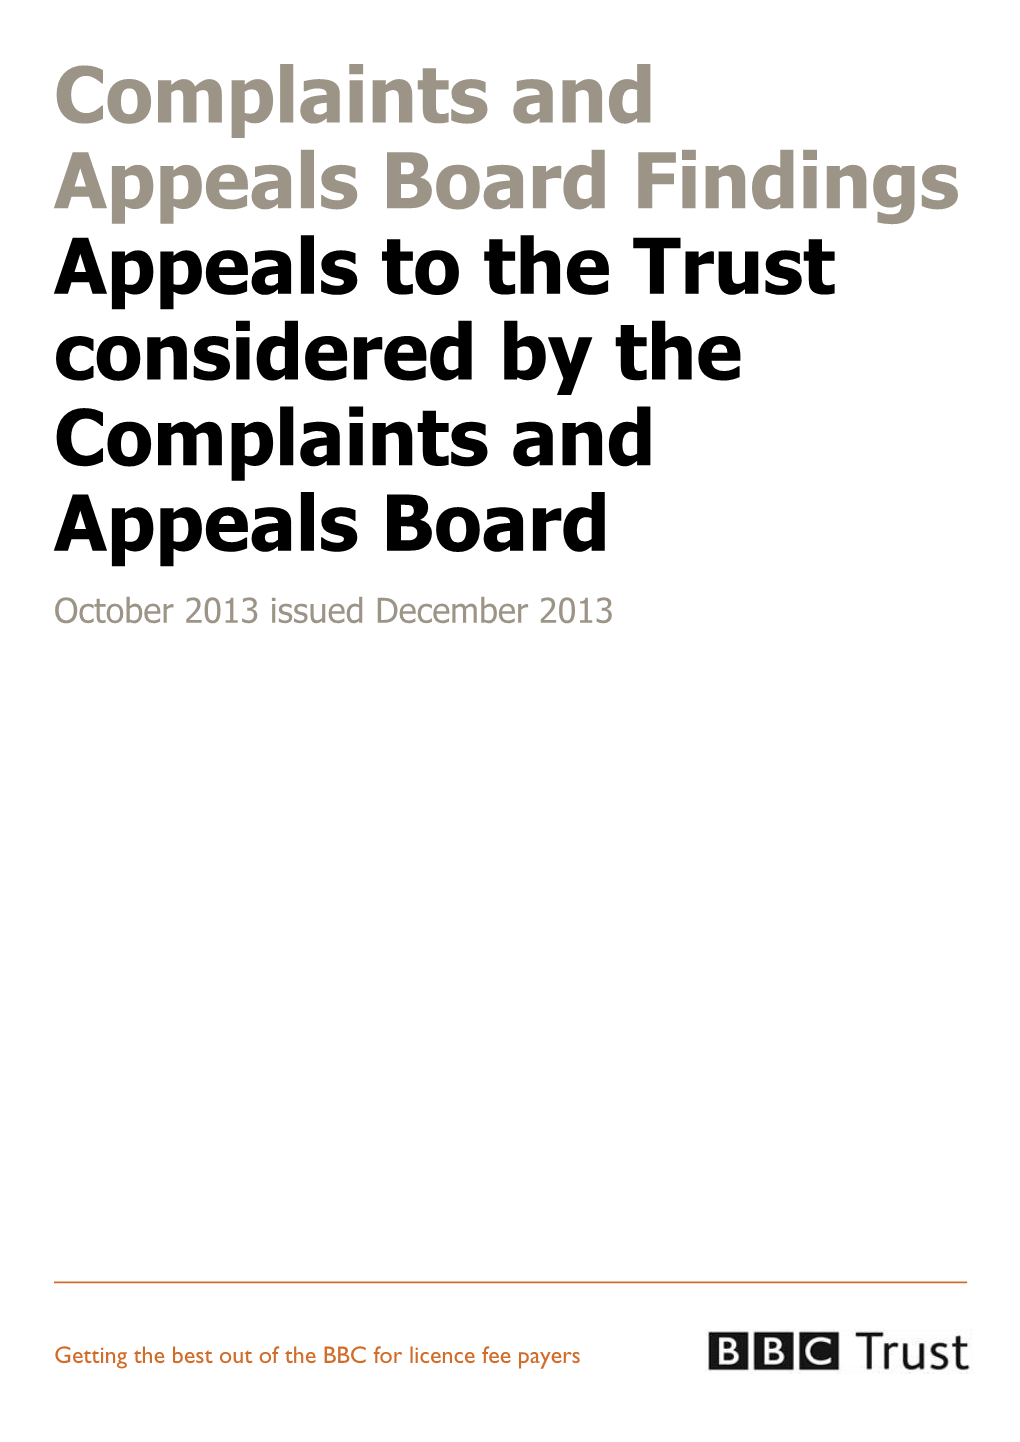 Complaints and Appeals Board Findings Appeals to the Trust Considered by the Complaints and Appeals Board October 2013 Issued December 2013